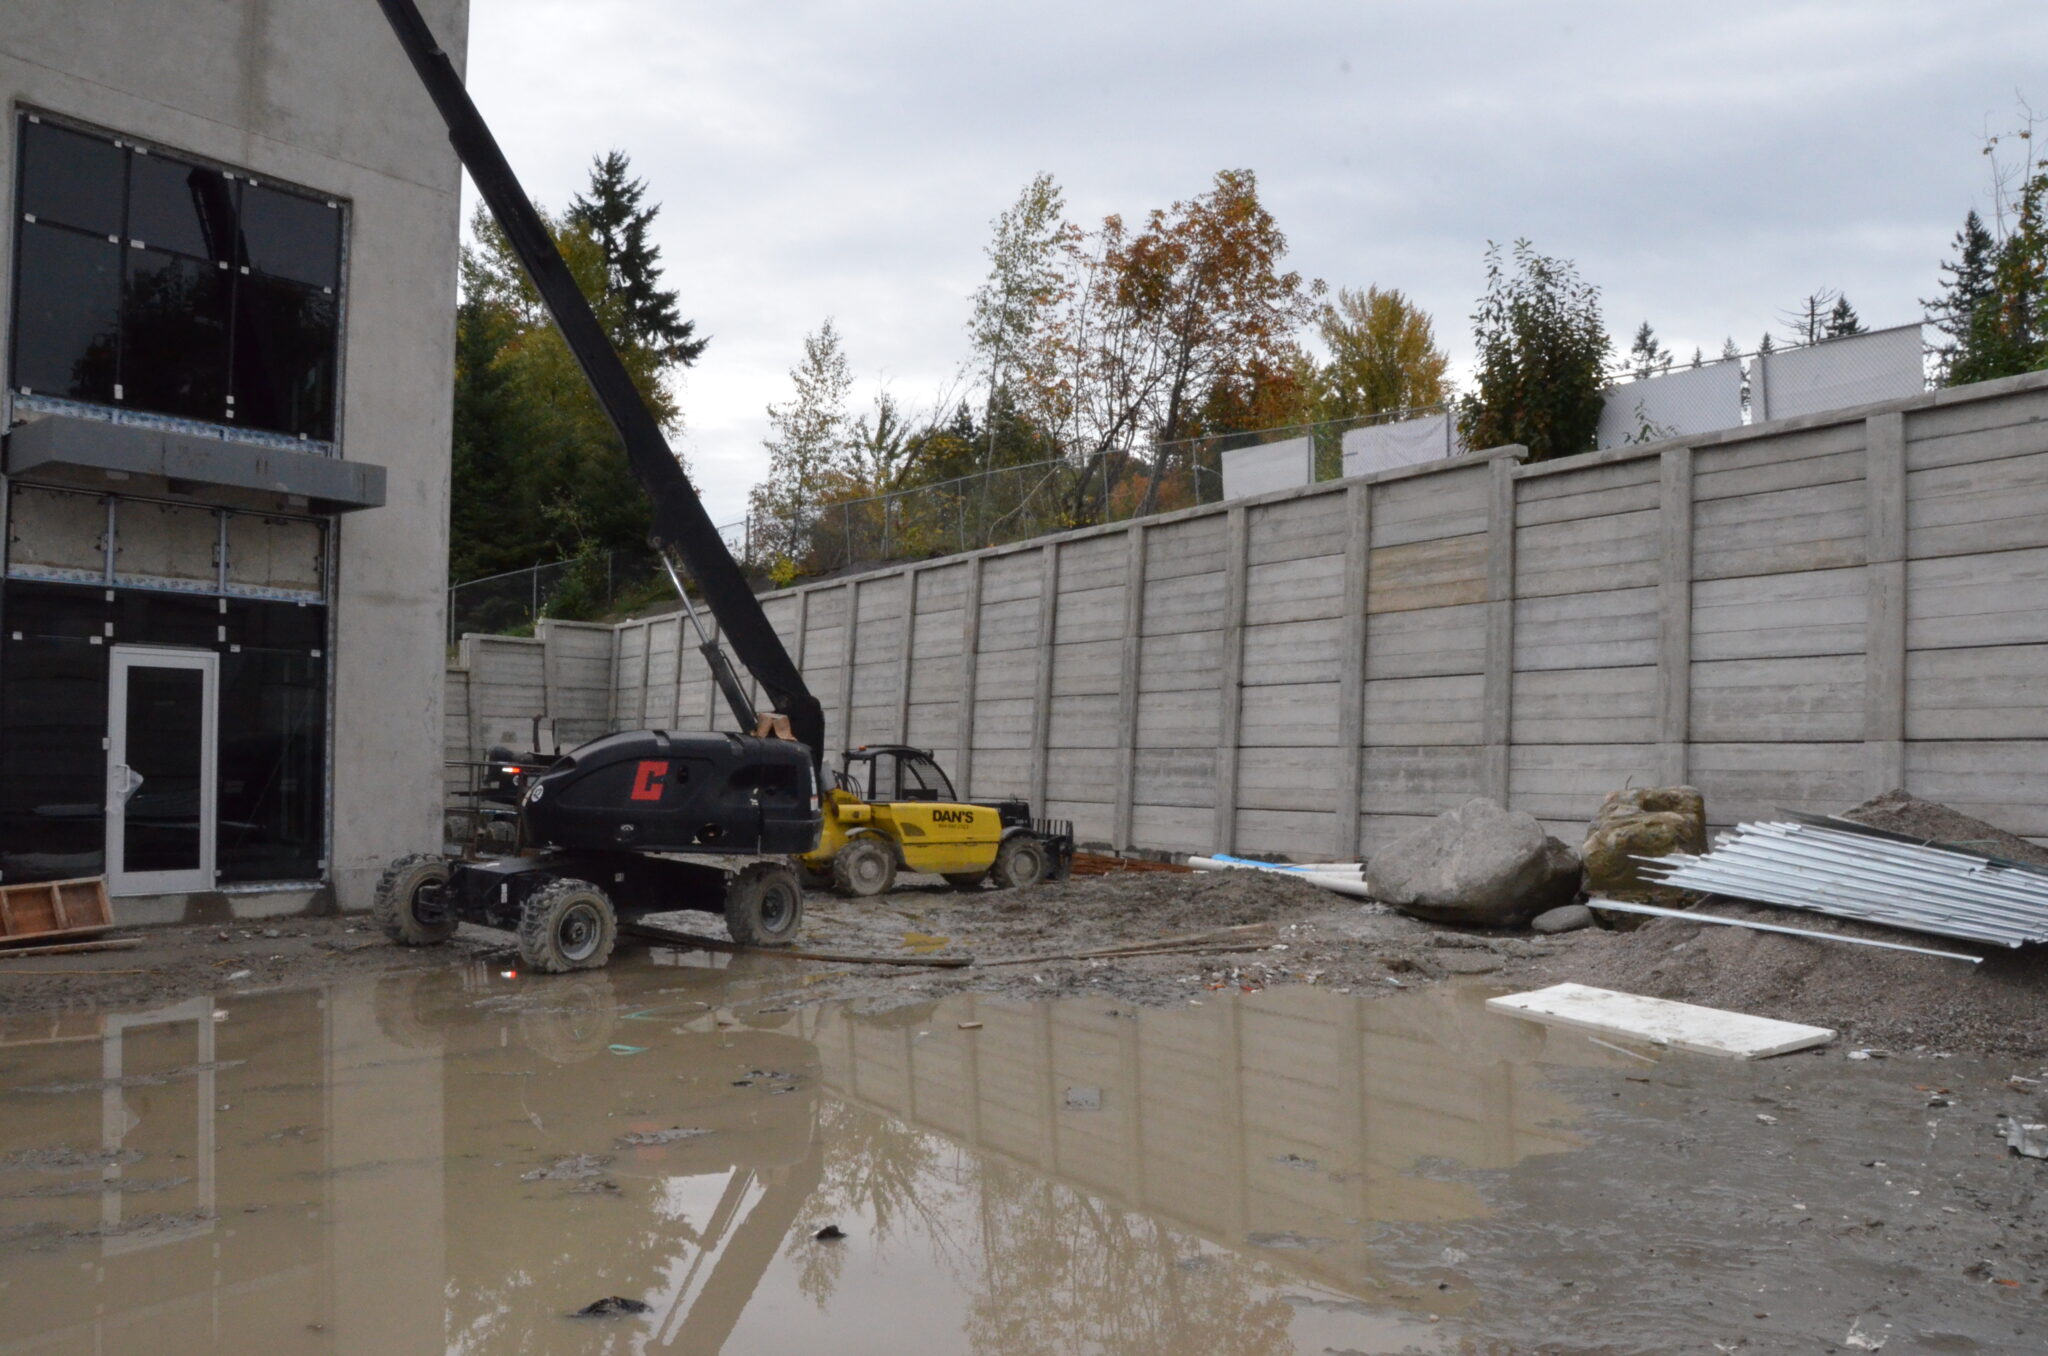 Retaining Wall Construction For An Industrial Business